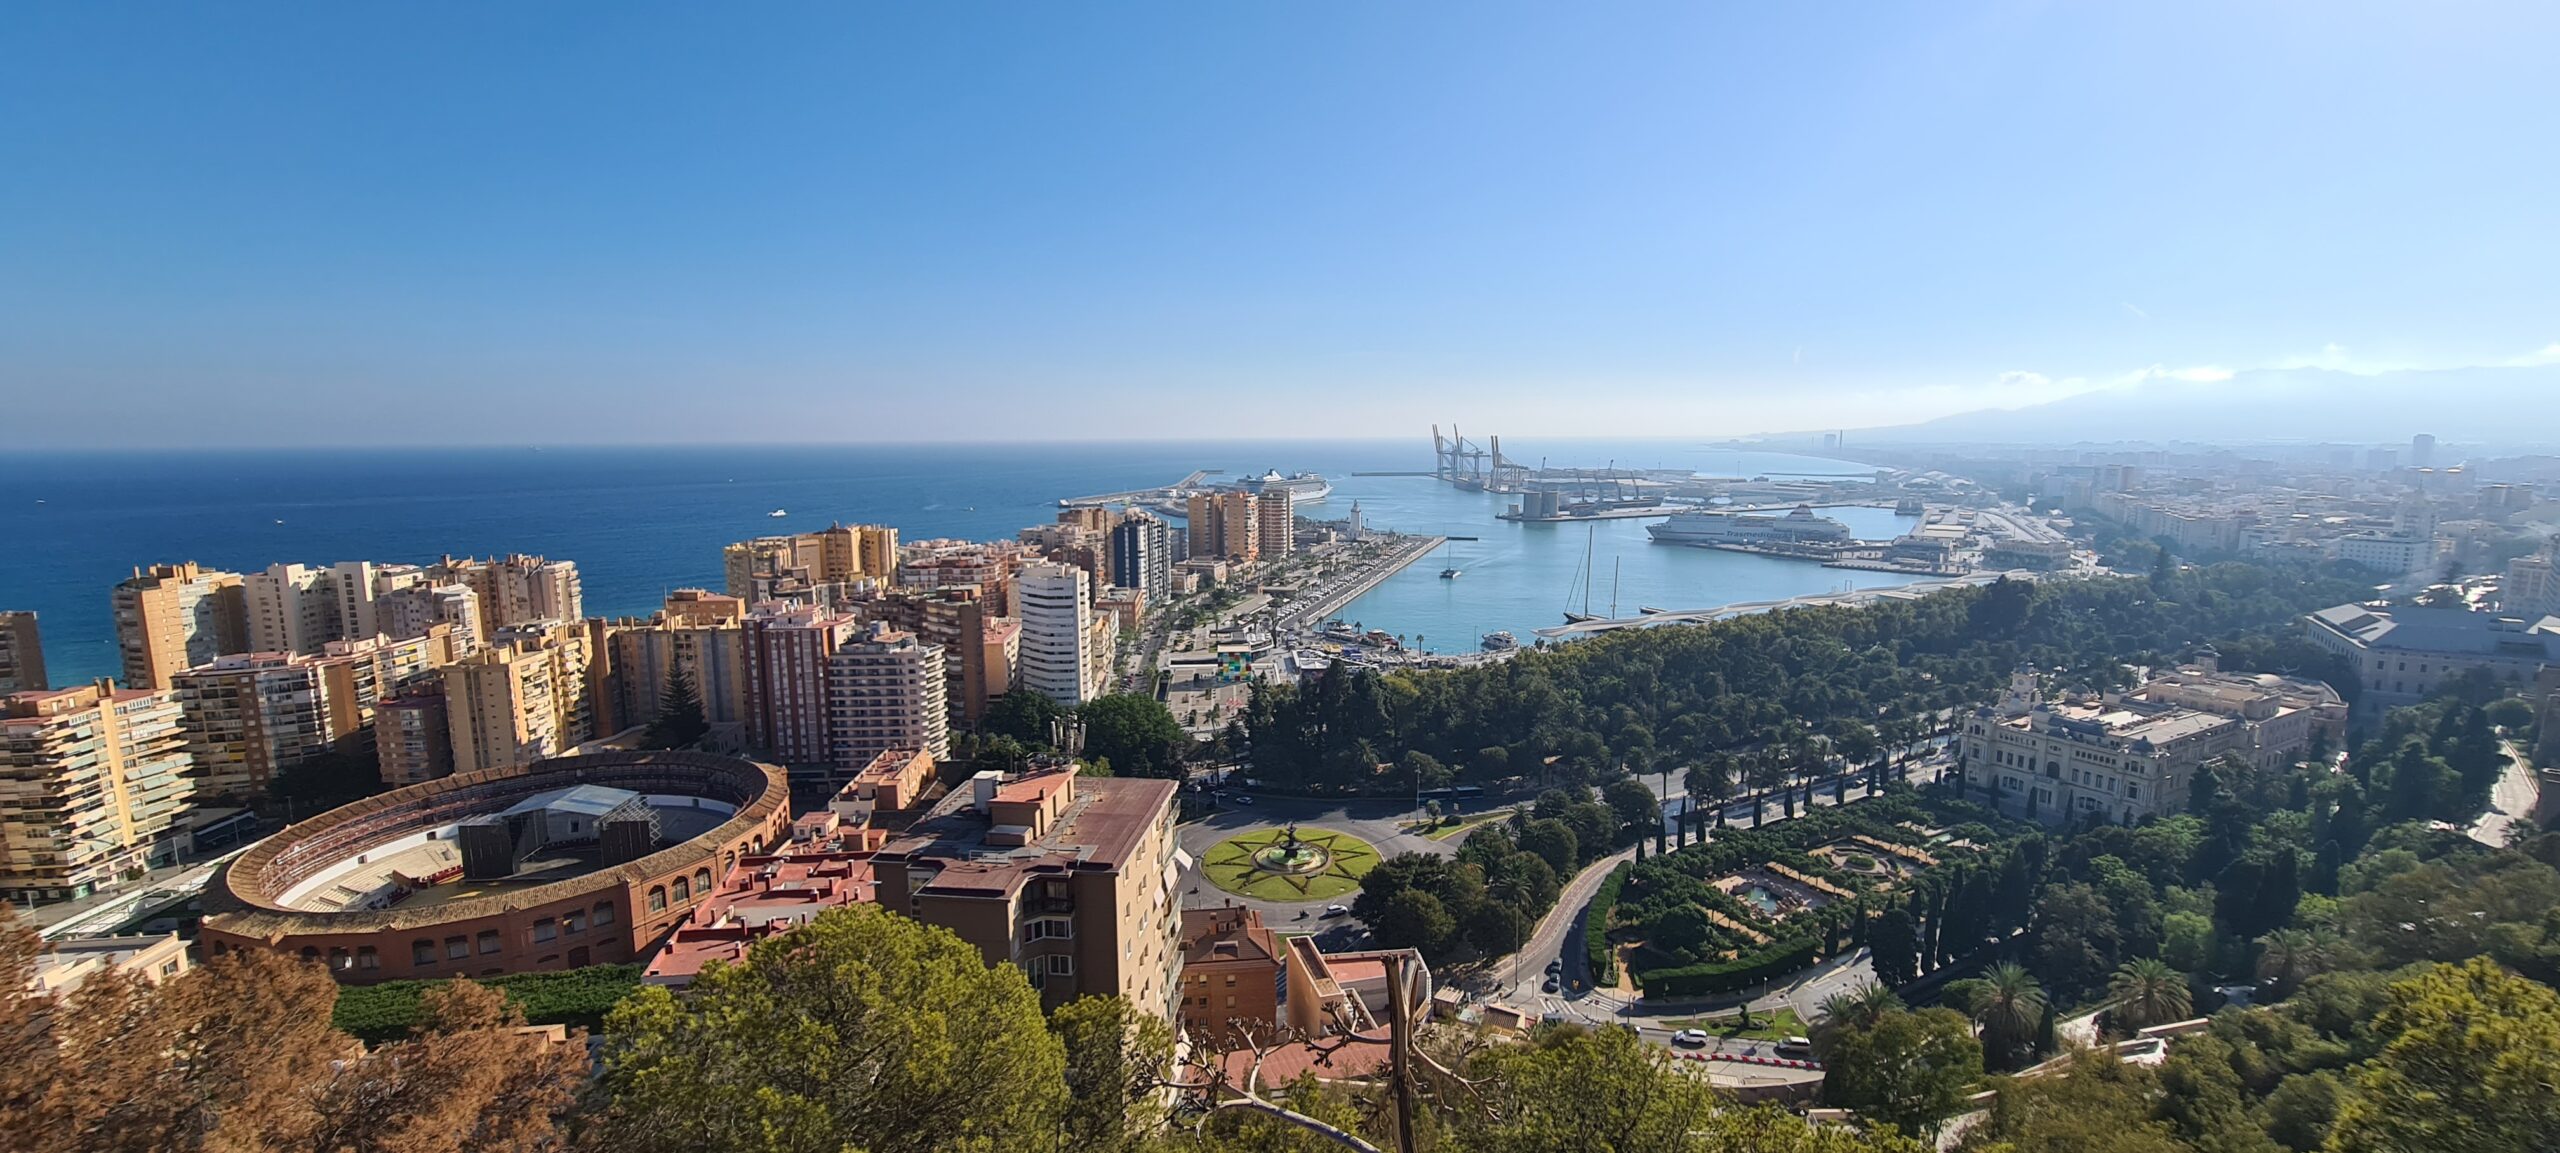 Gibralfaro Castle offers excellent panoramic views of the Malaga city and sea from its viewpoints